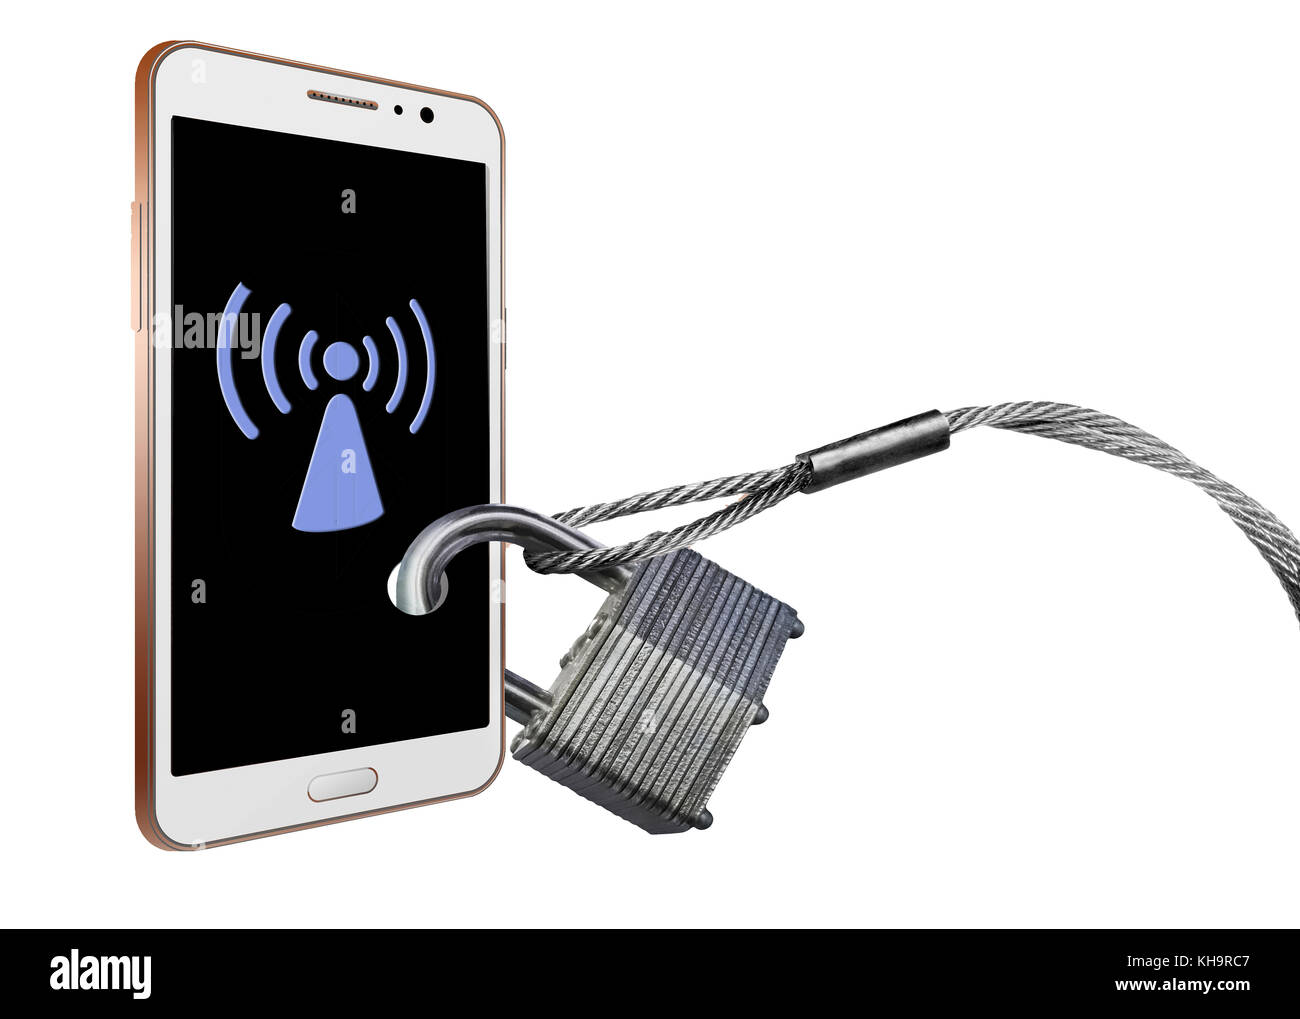 Cell phone security and preventing signal theft is the theme of this illustration. Wi-fi signals, Bluetooth and cellular signals fill the air and are Stock Photo